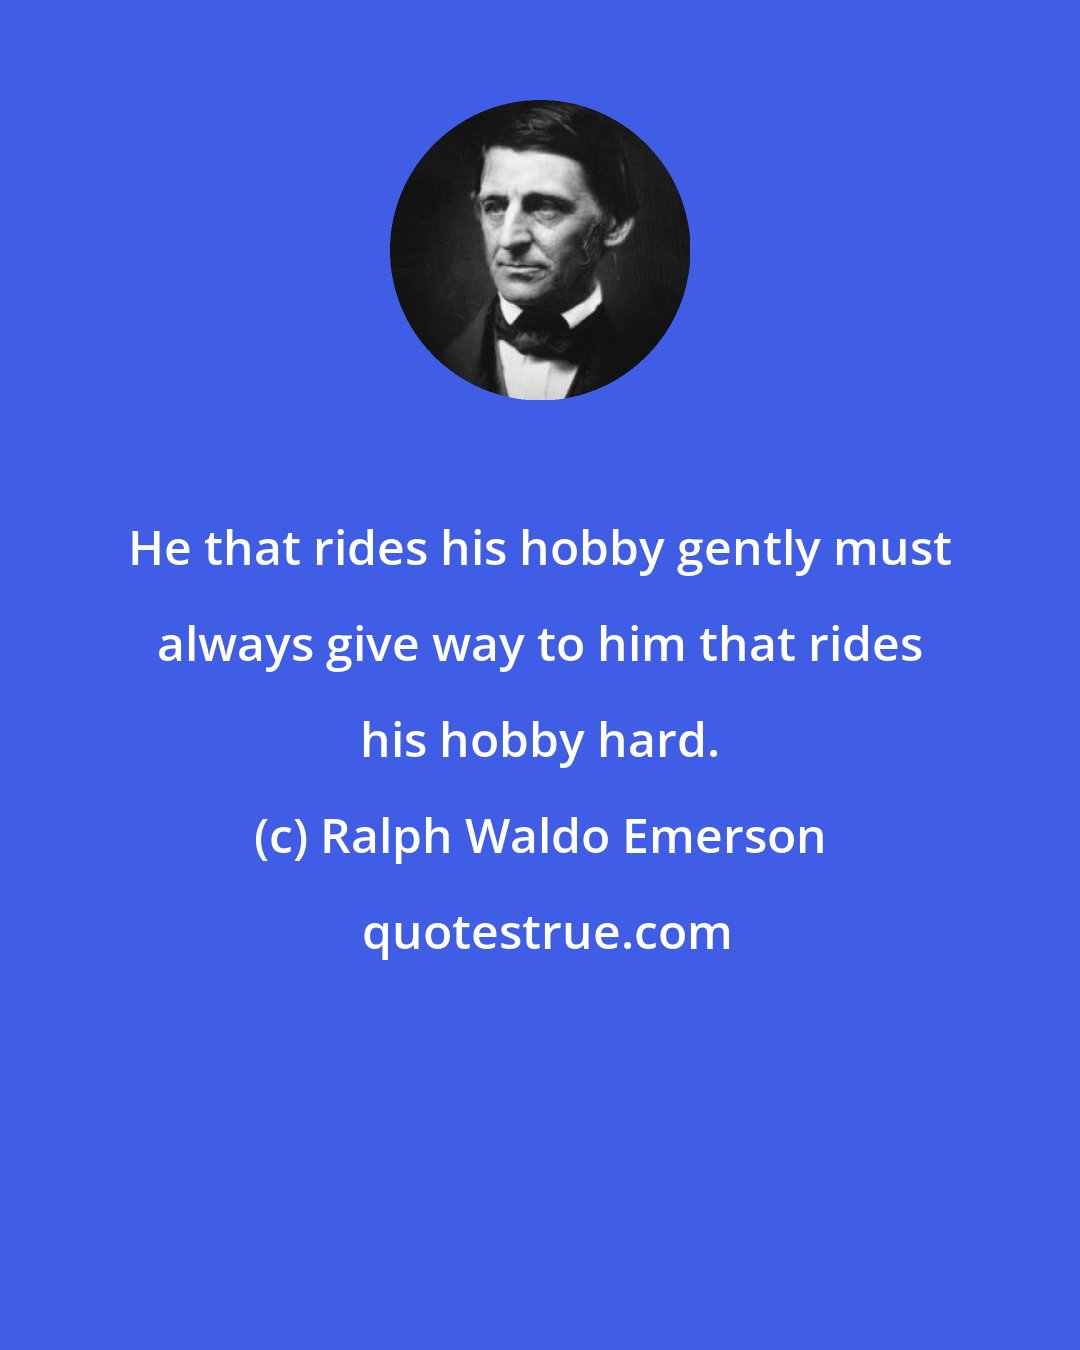 Ralph Waldo Emerson: He that rides his hobby gently must always give way to him that rides his hobby hard.